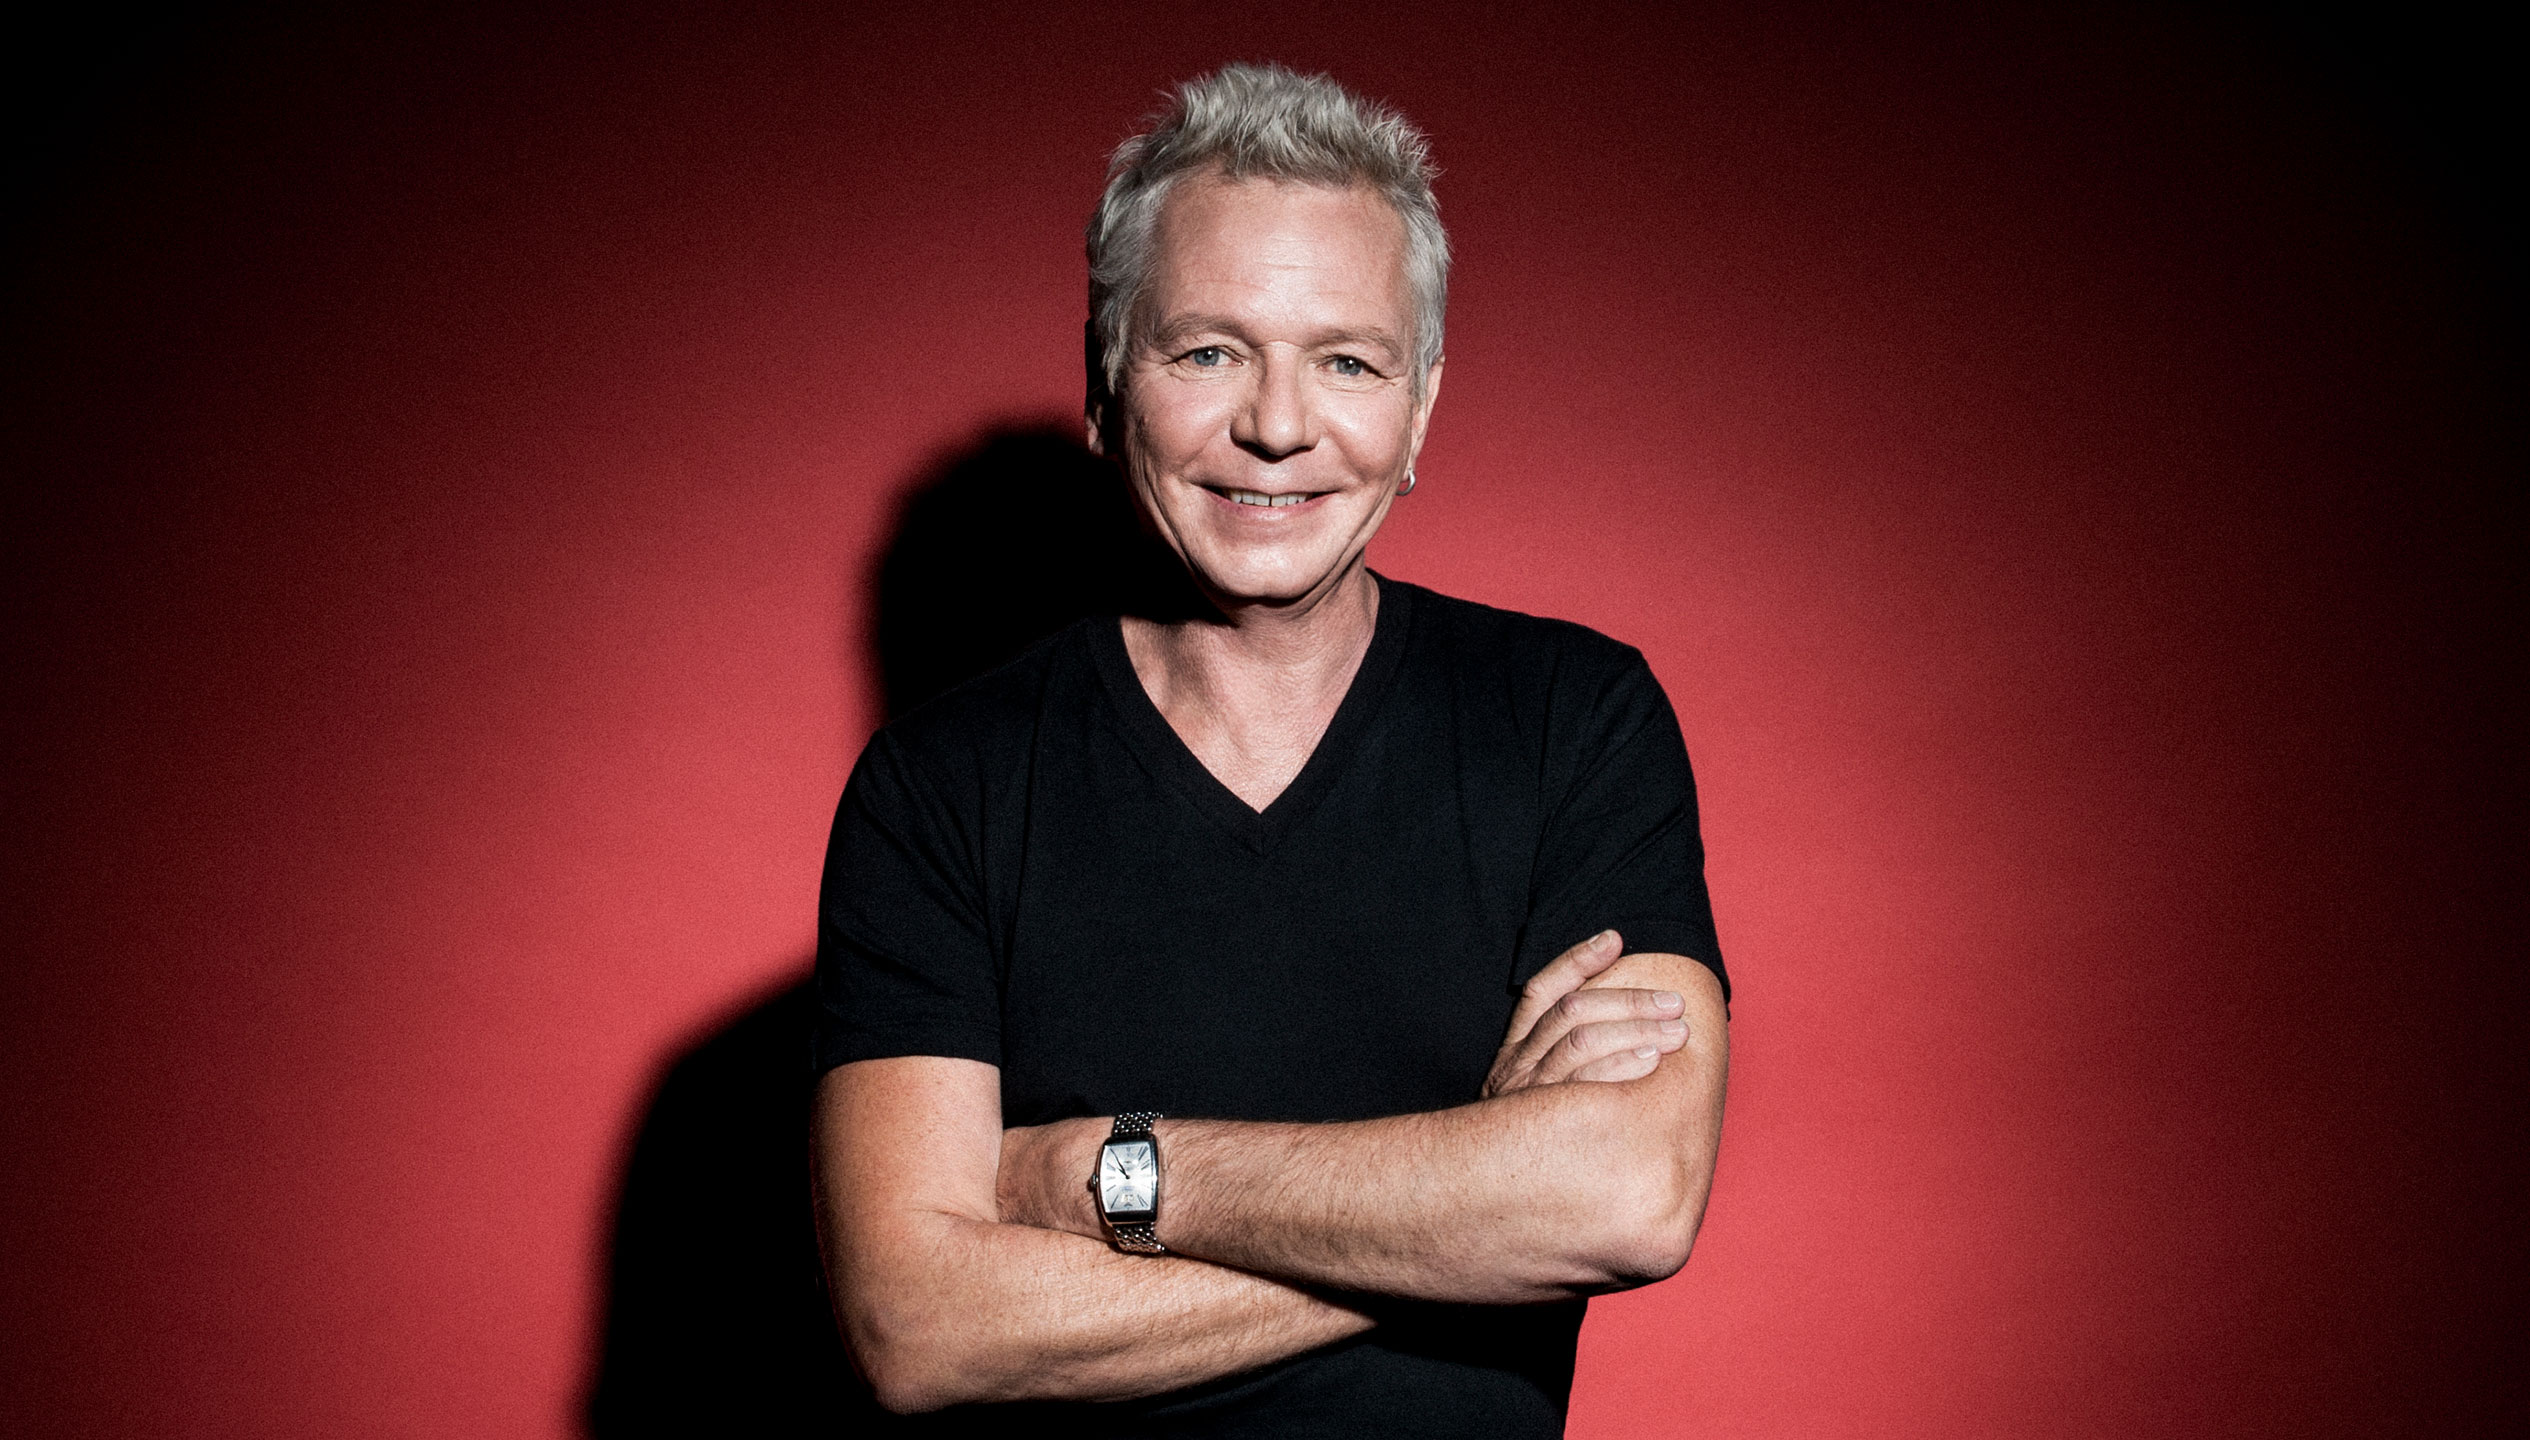 A white man in his 60s with grey hair wears a black t-shirt and has his arms crossed, standing in front of a red background.